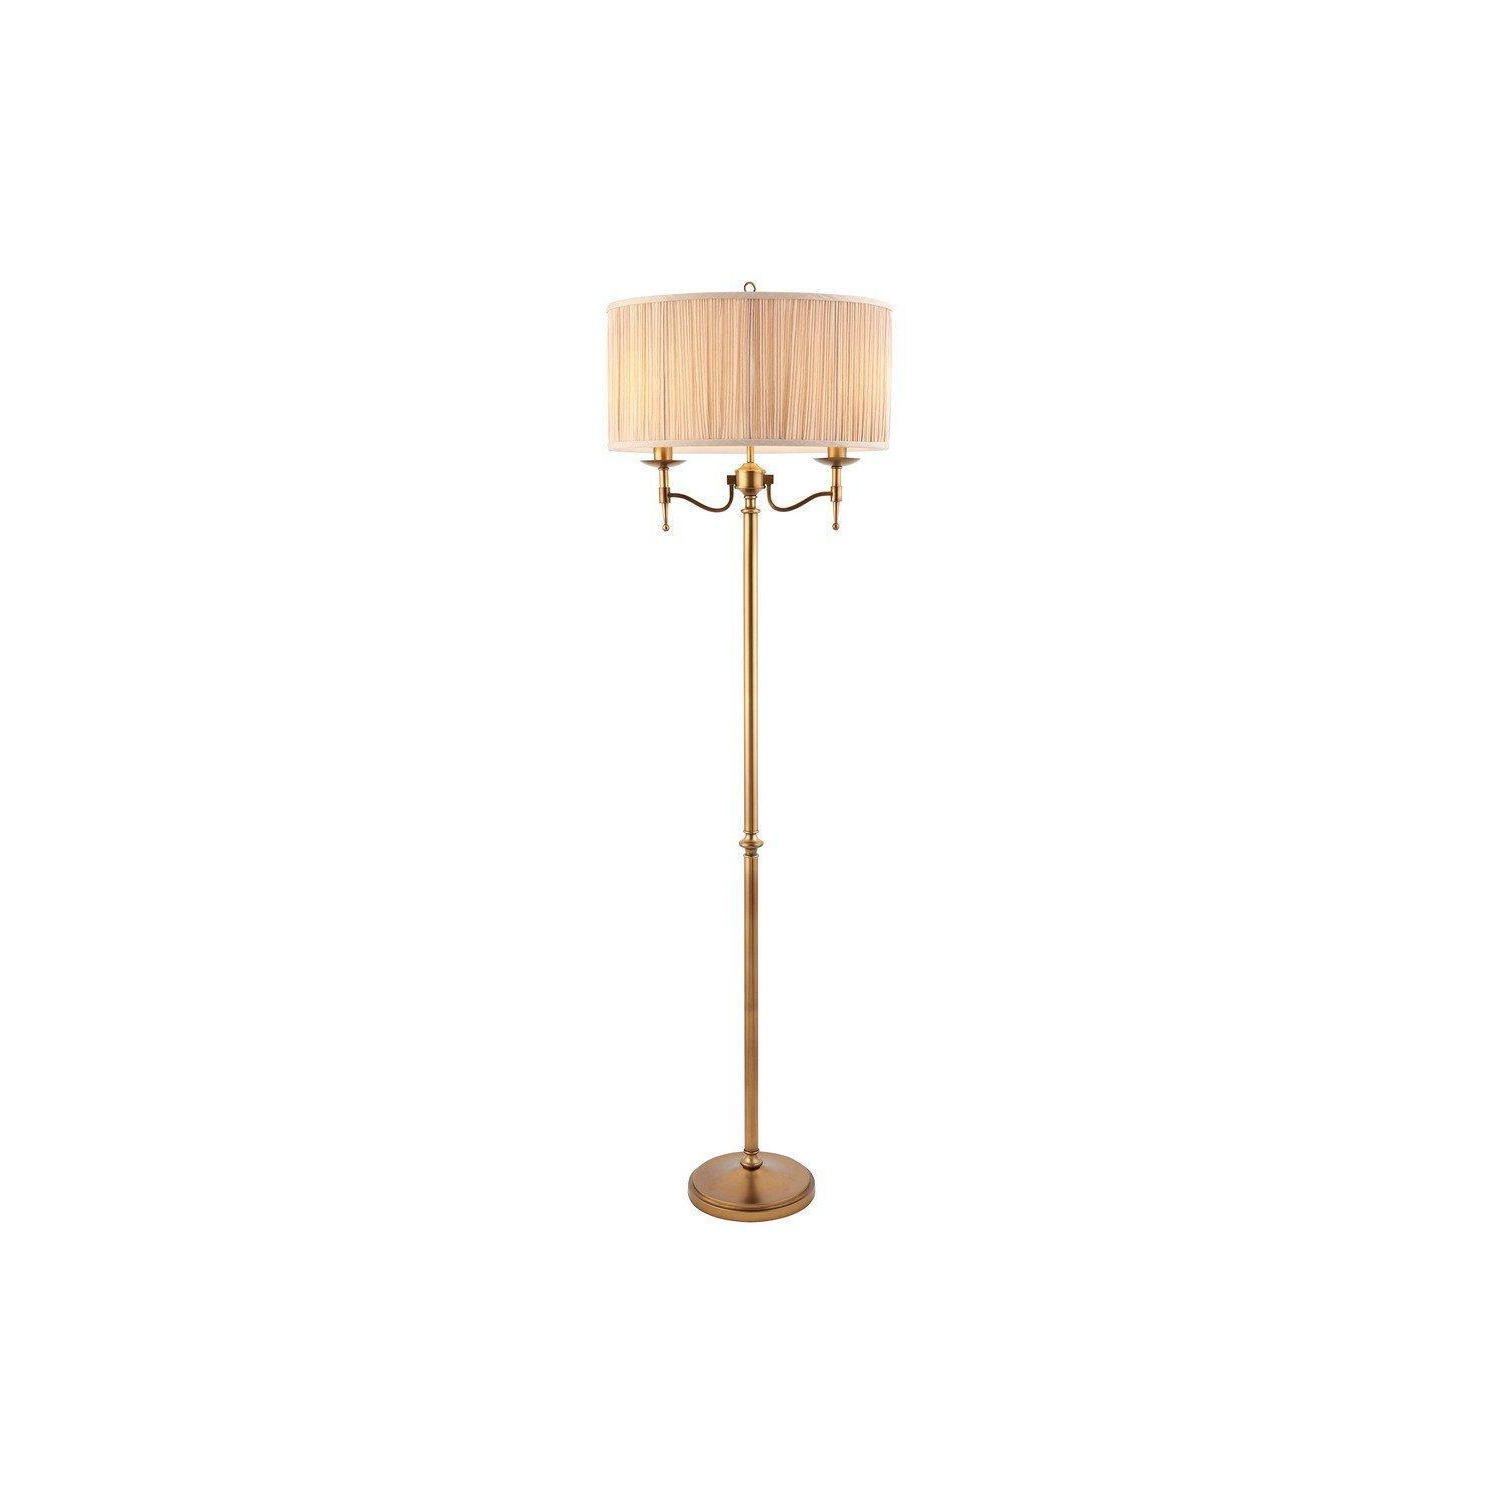 Stanford 2 Light Floor Lamp Antique Brass with Beige Shade E14 - image 1